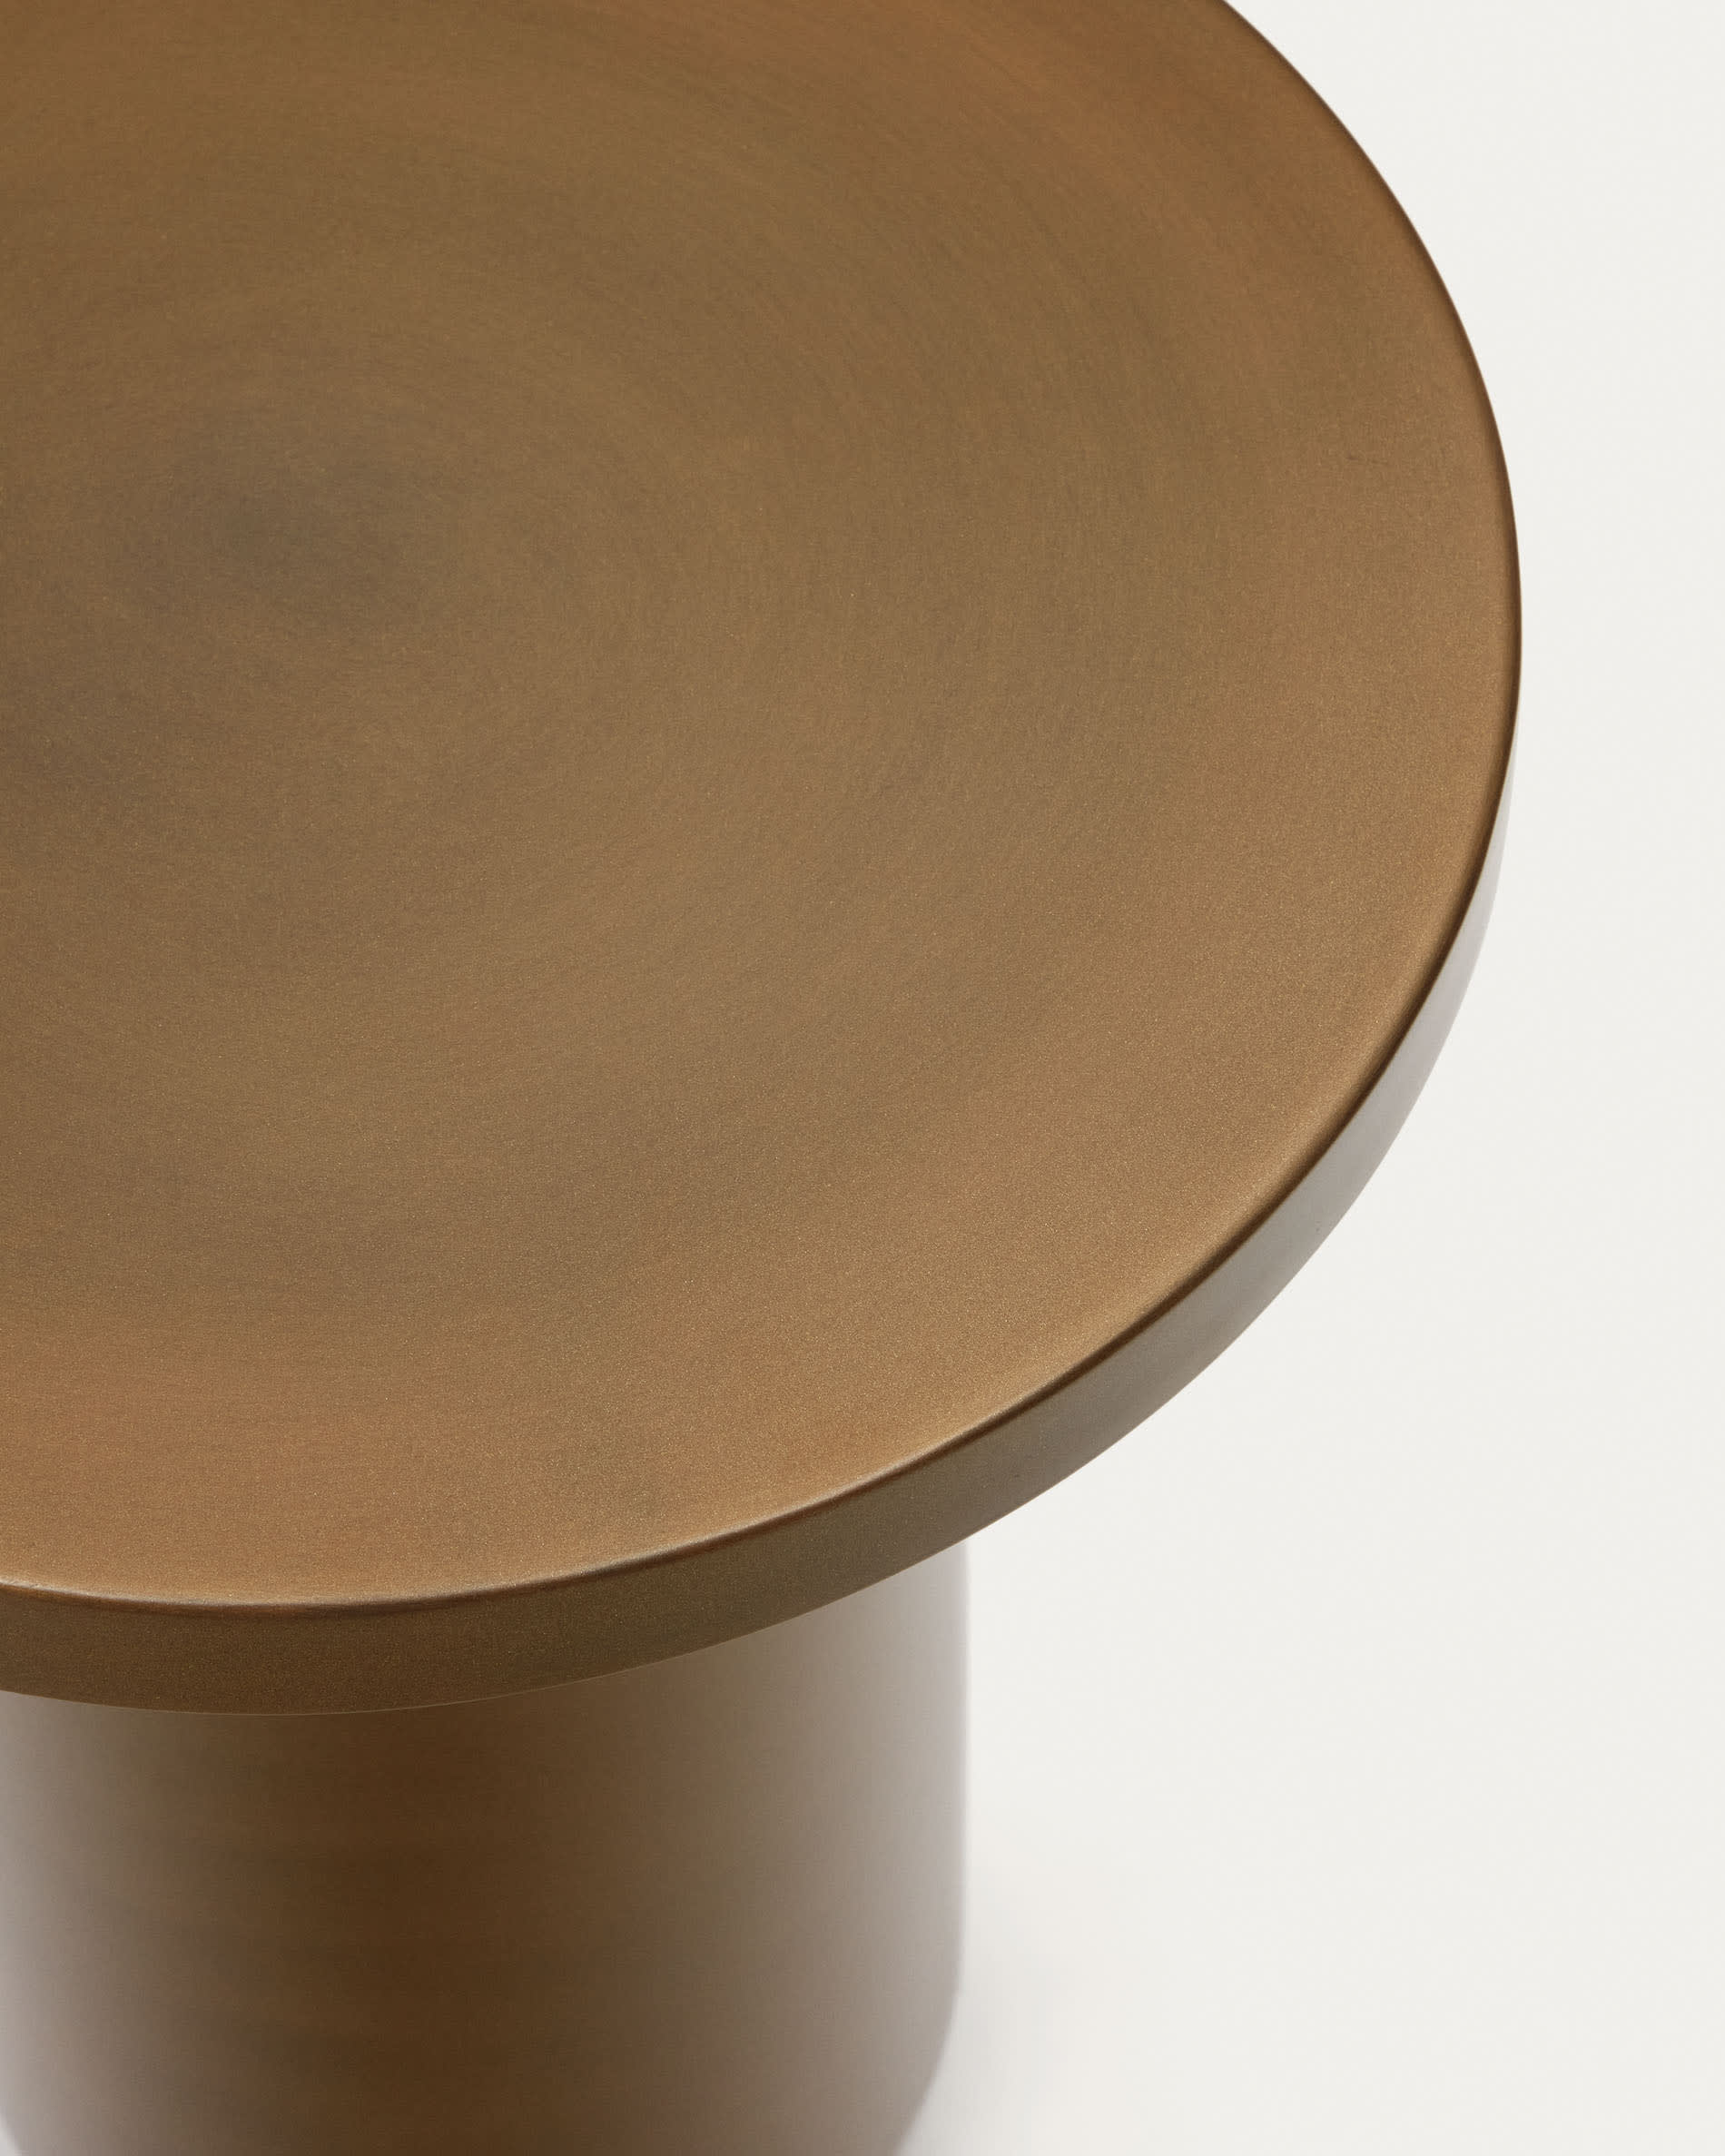 Malya metal round side cm brushed 40.5 Kave table Ø in copper Home 